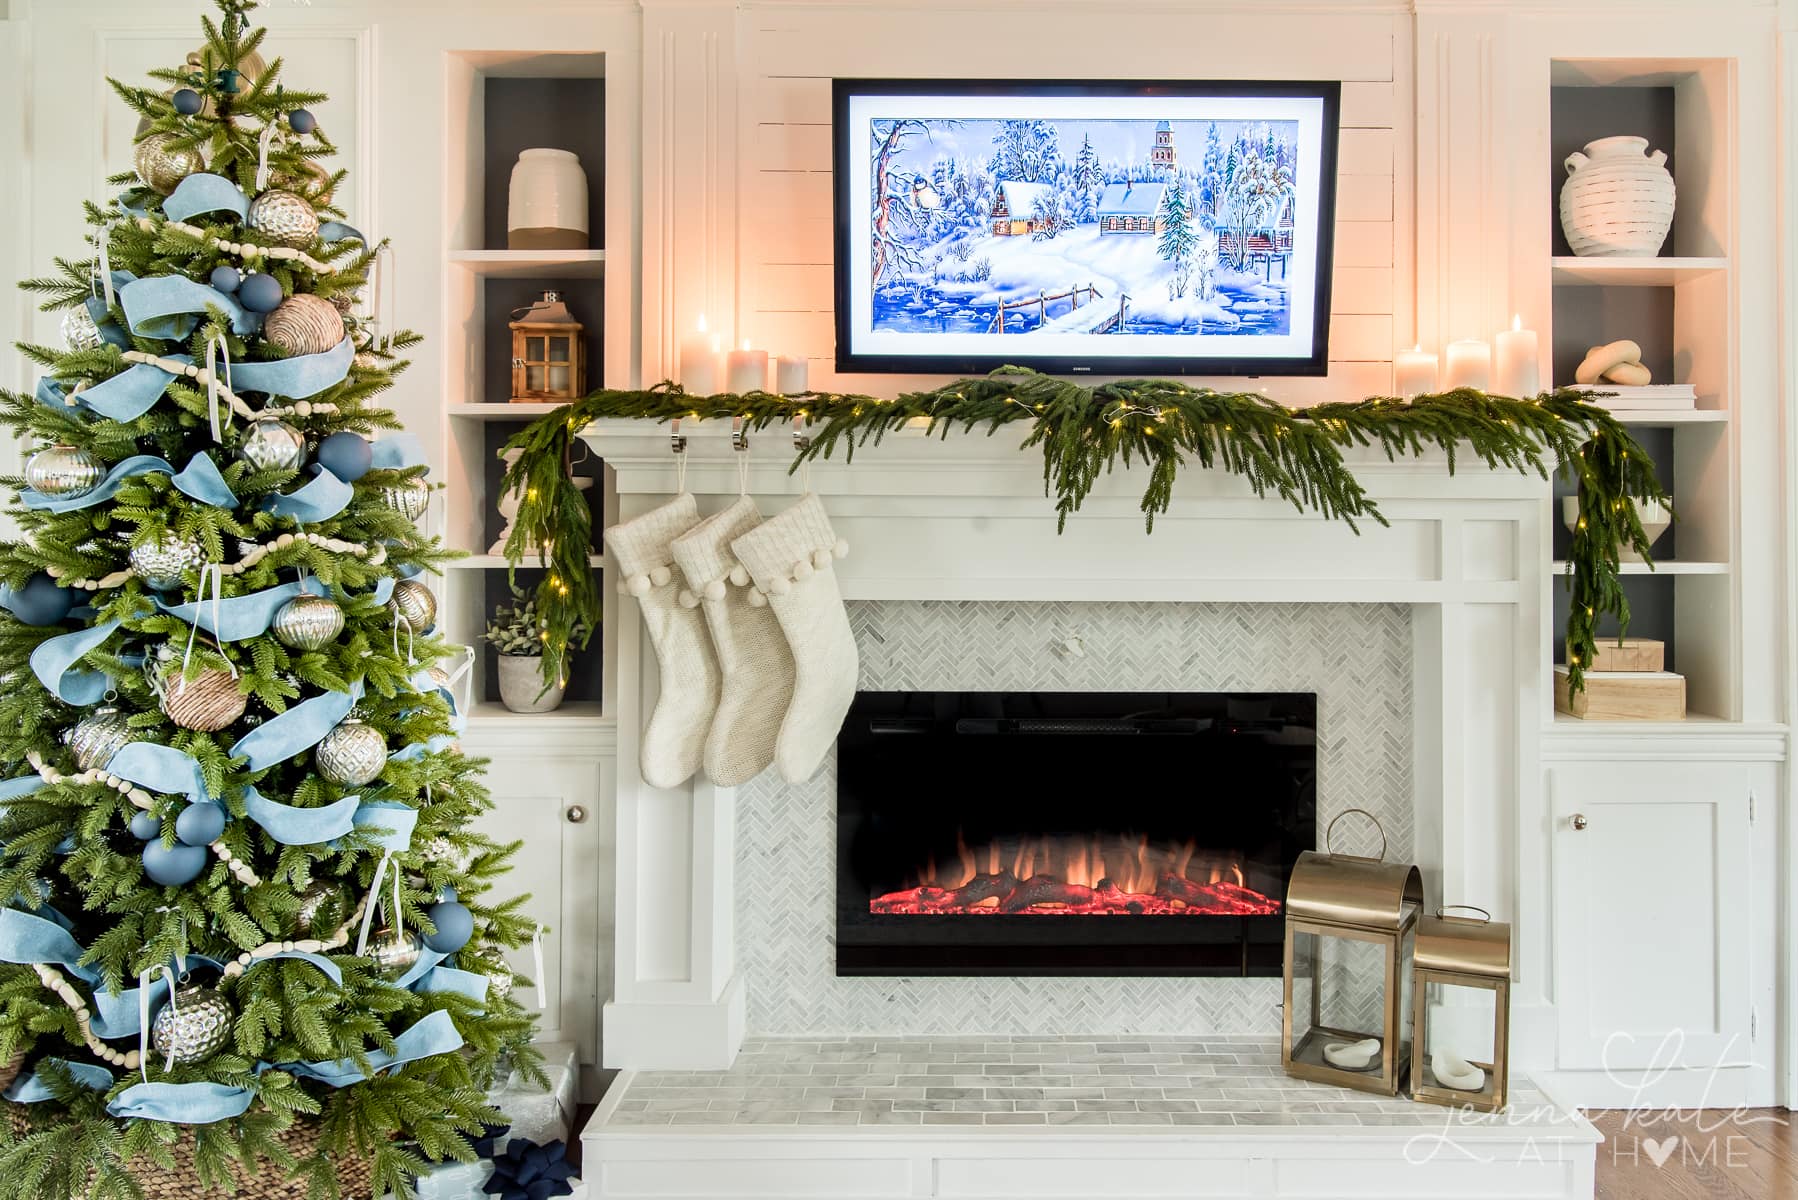 Living room fireplace and mantel with minimal garland and Christmas tree